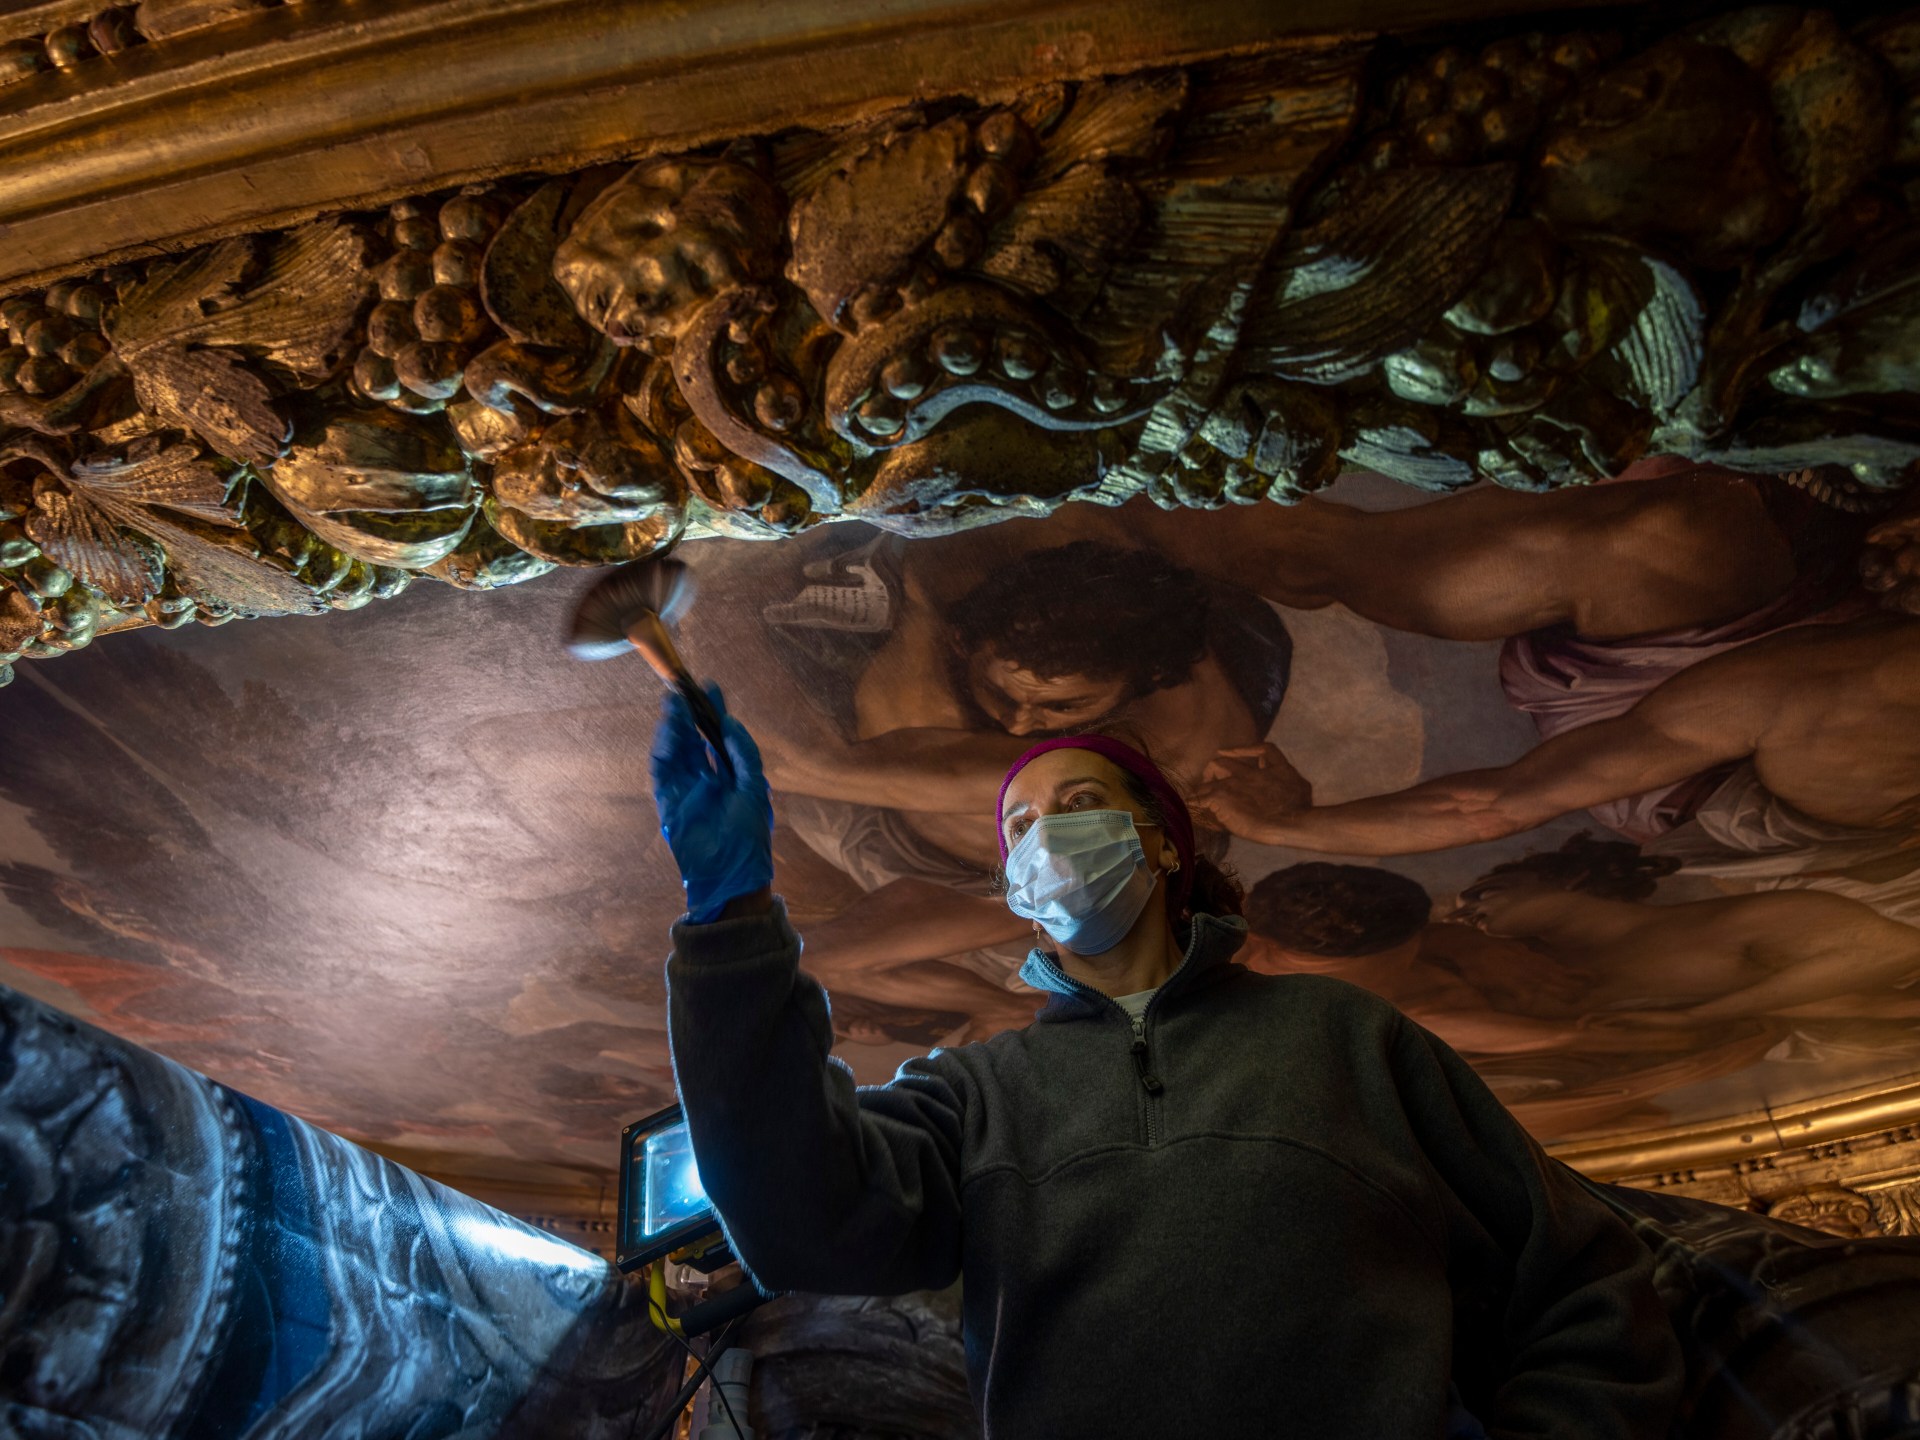 Pictures: ‘Preventive conservation’ at Venetian palace